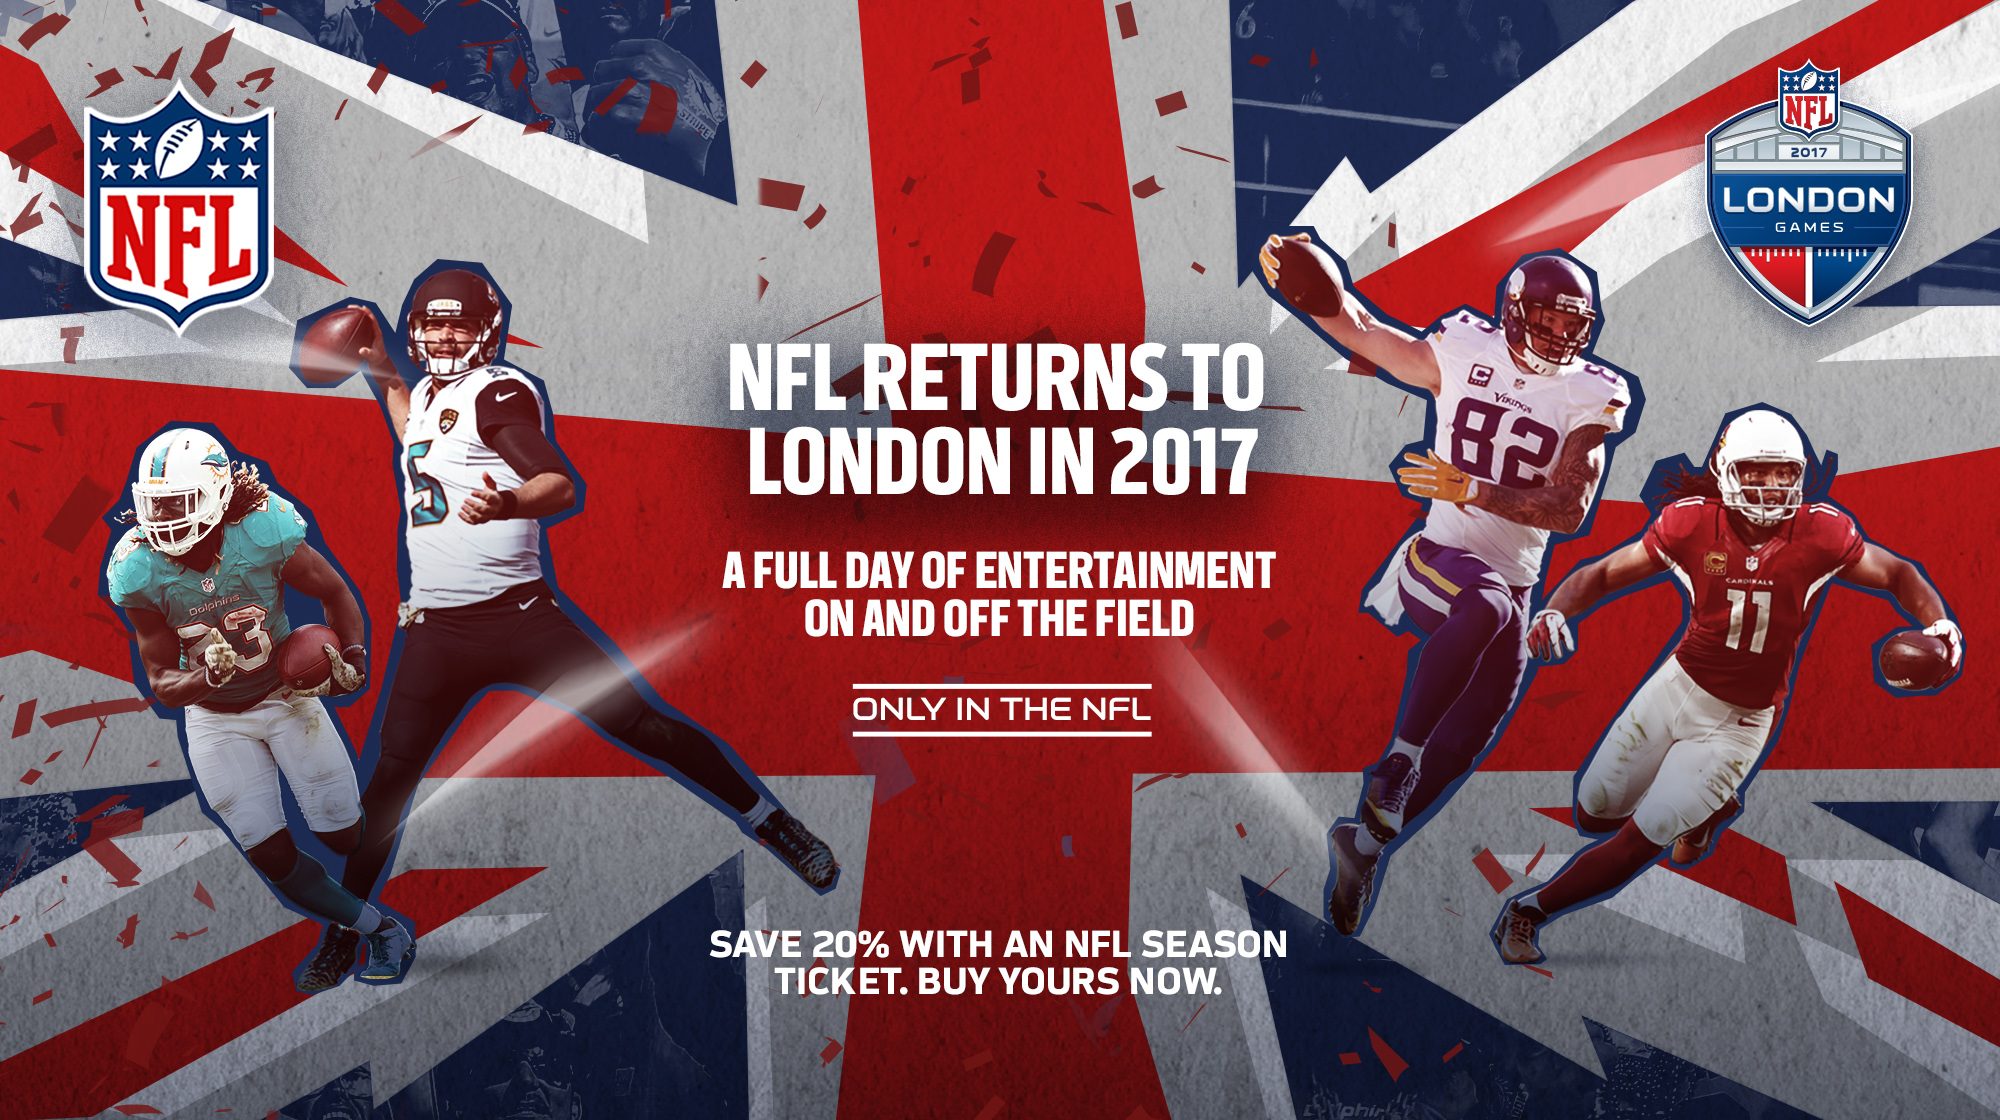 NFL London Games 2017 campaign creative with stars from the four playing teams with the NFL returns written on top. Earnie creative design